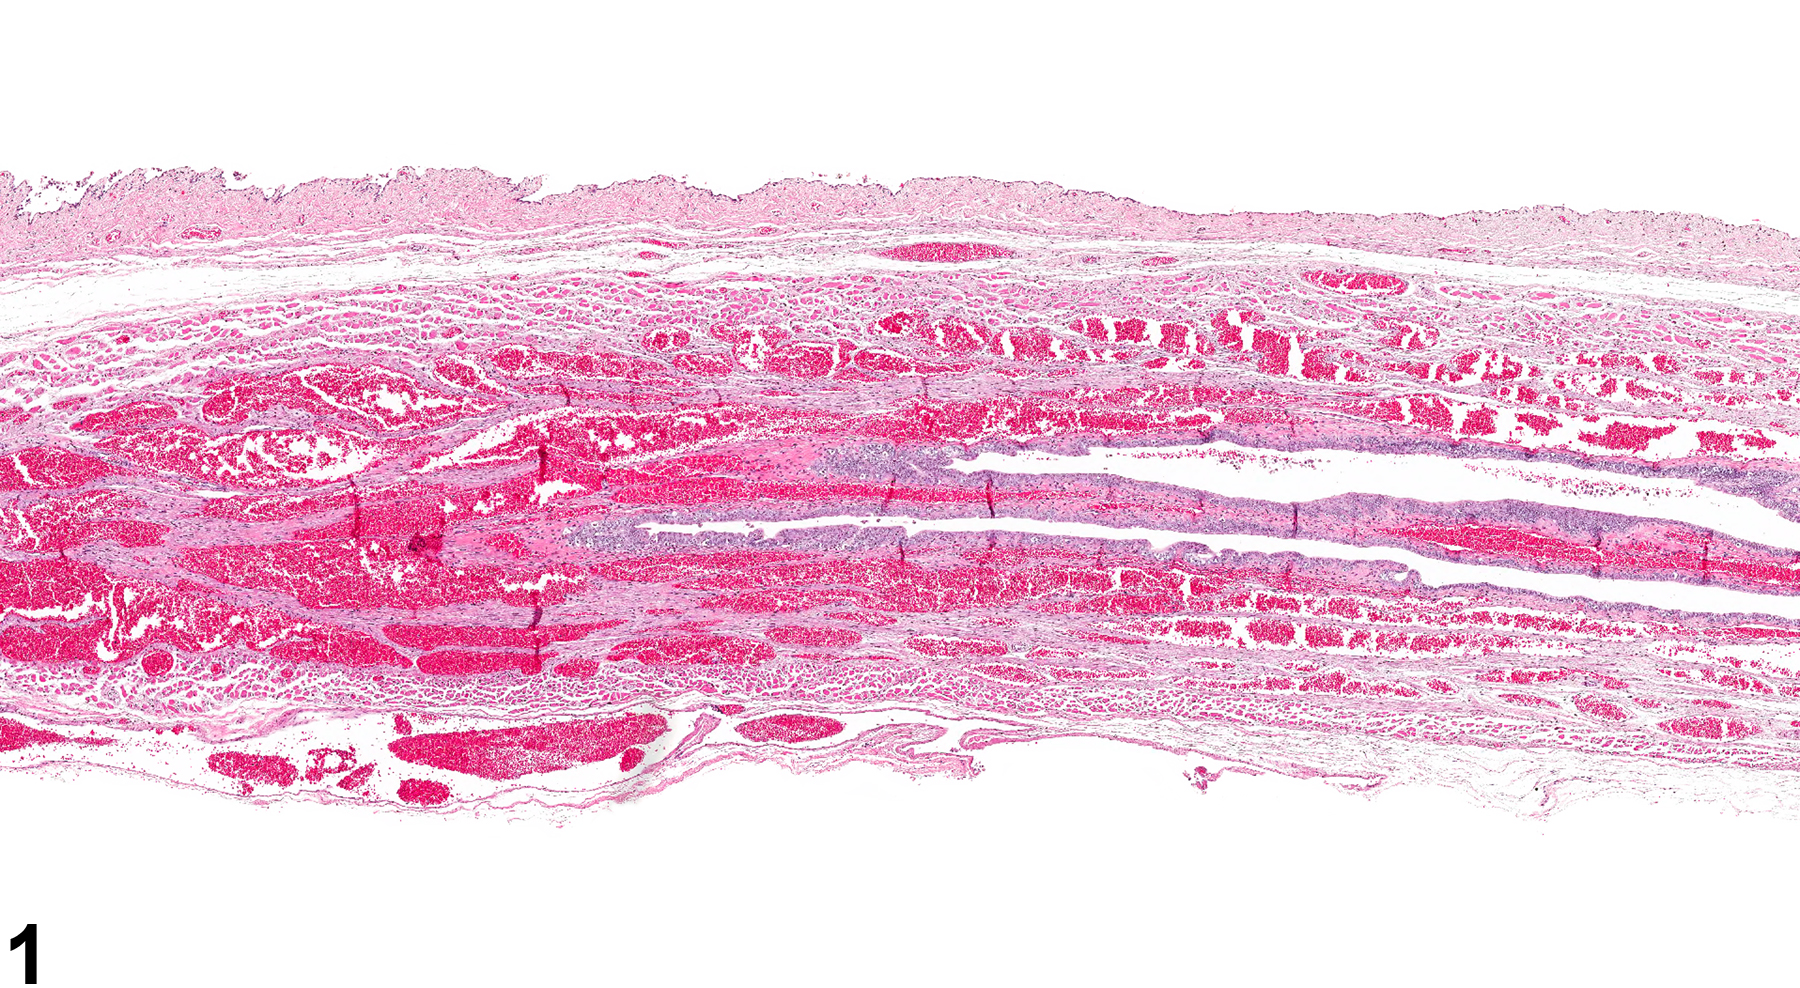 Image of angiectasis in the vagina from a female F344/N rat in a chronic study